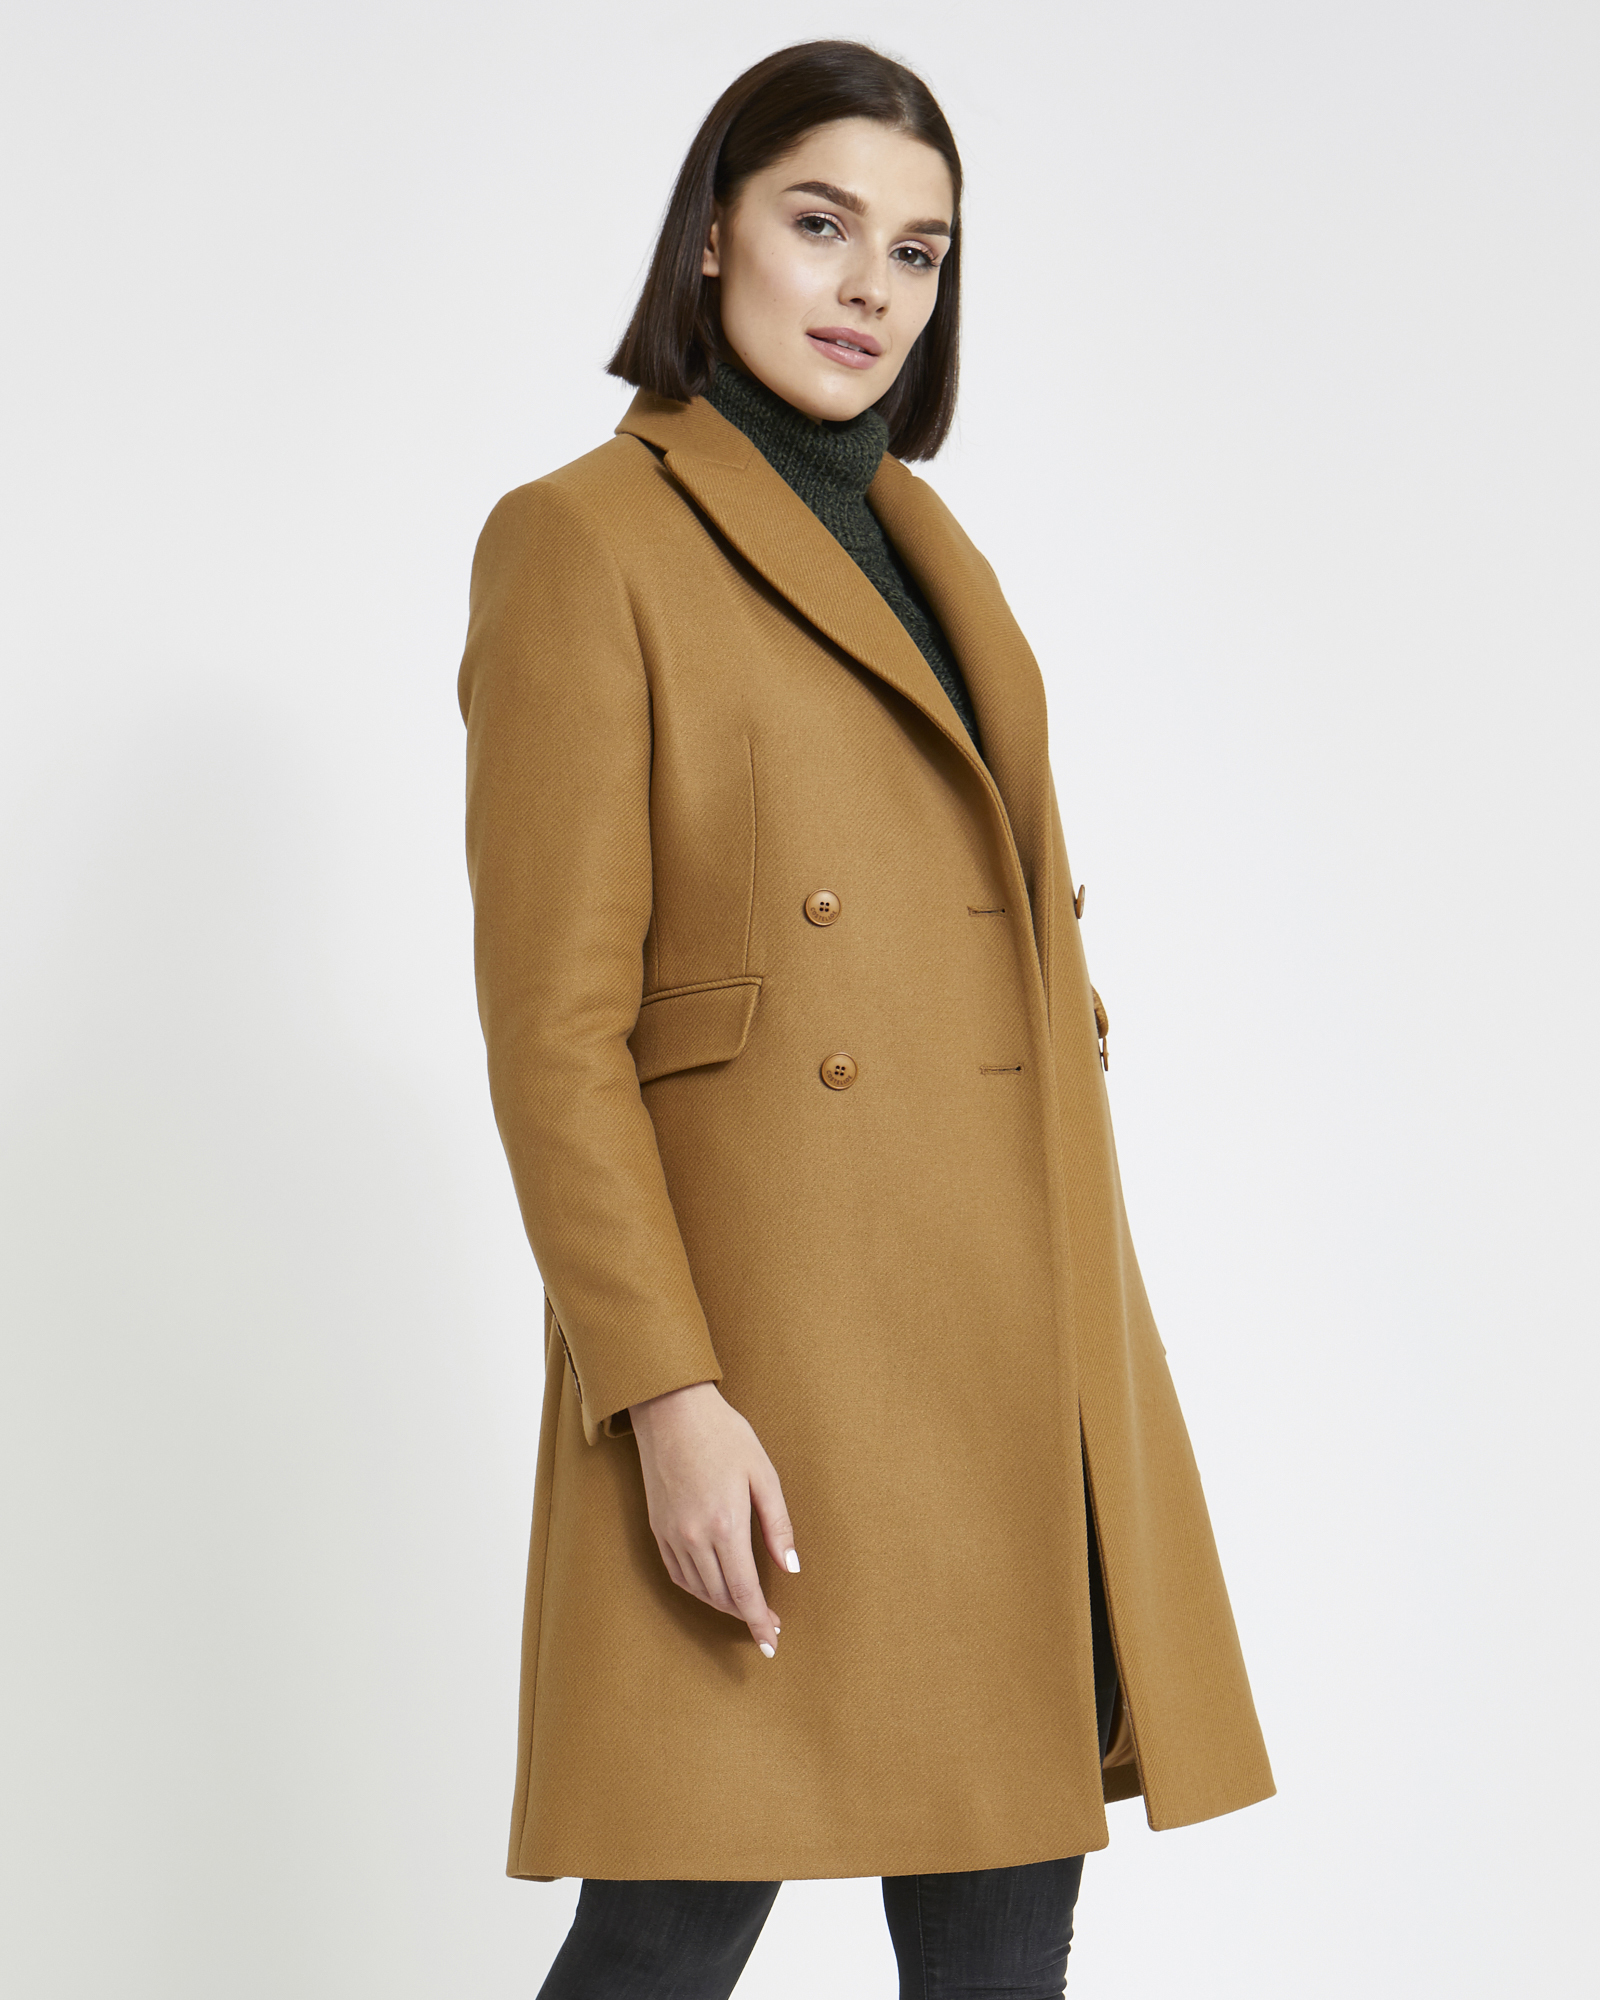 Dunnes Stores | Camel Paul Costelloe Living Studio Double Breasted Coat